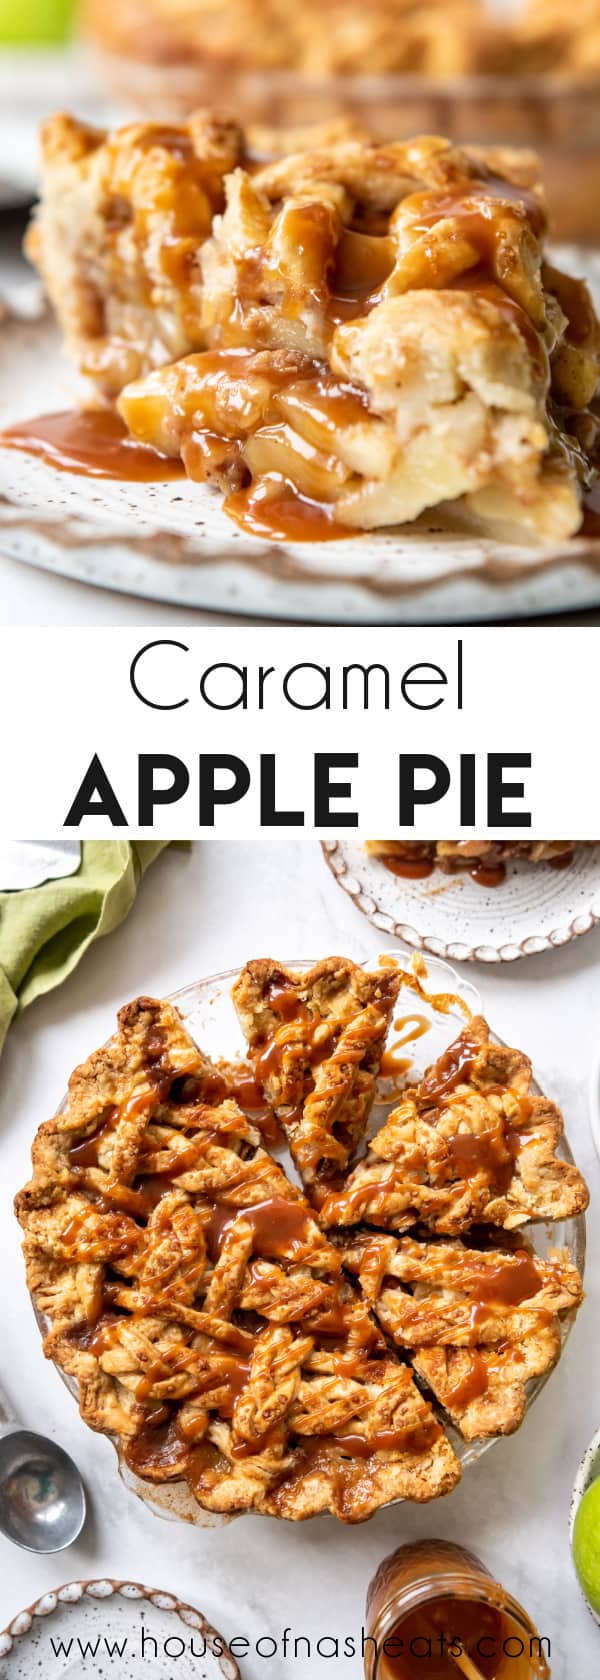 A collage of caramel apple pie images with text overlay.